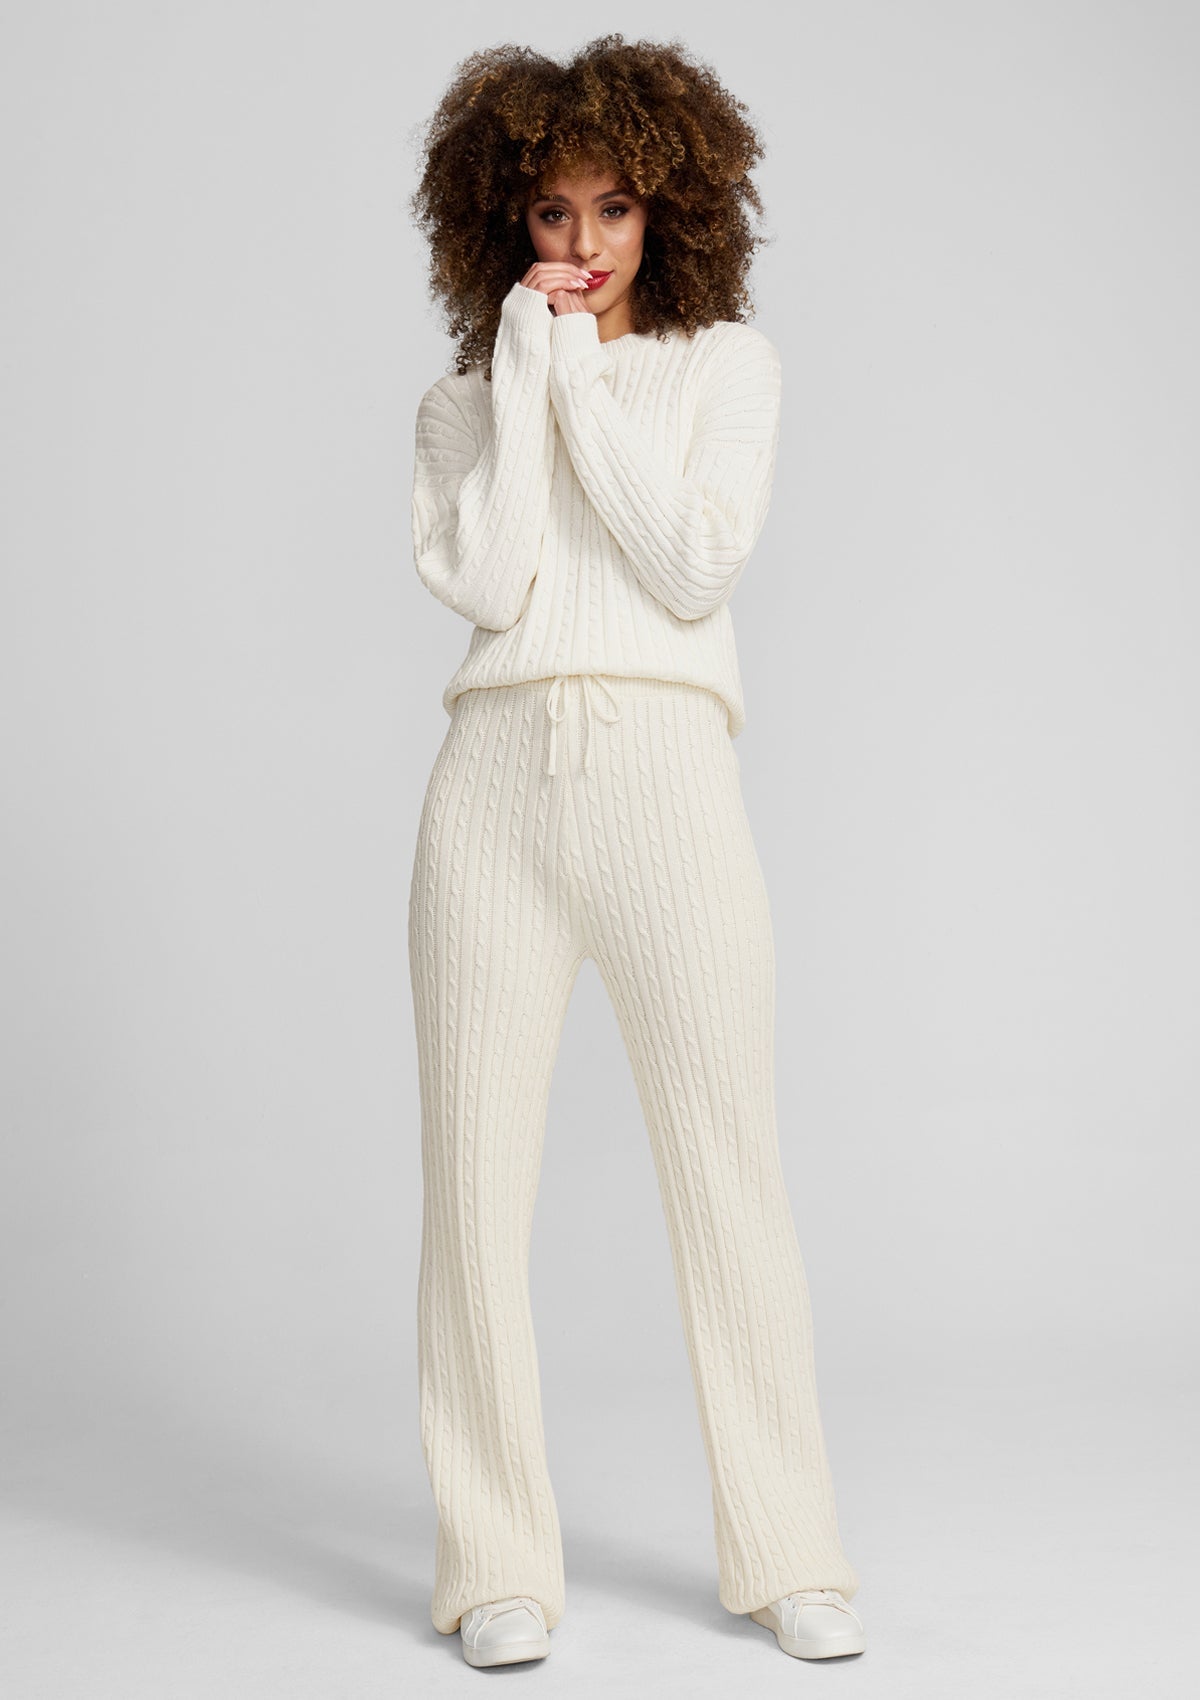 Alloy Apparel Tall Dakota Cable Knit Pants for Women in Ivory